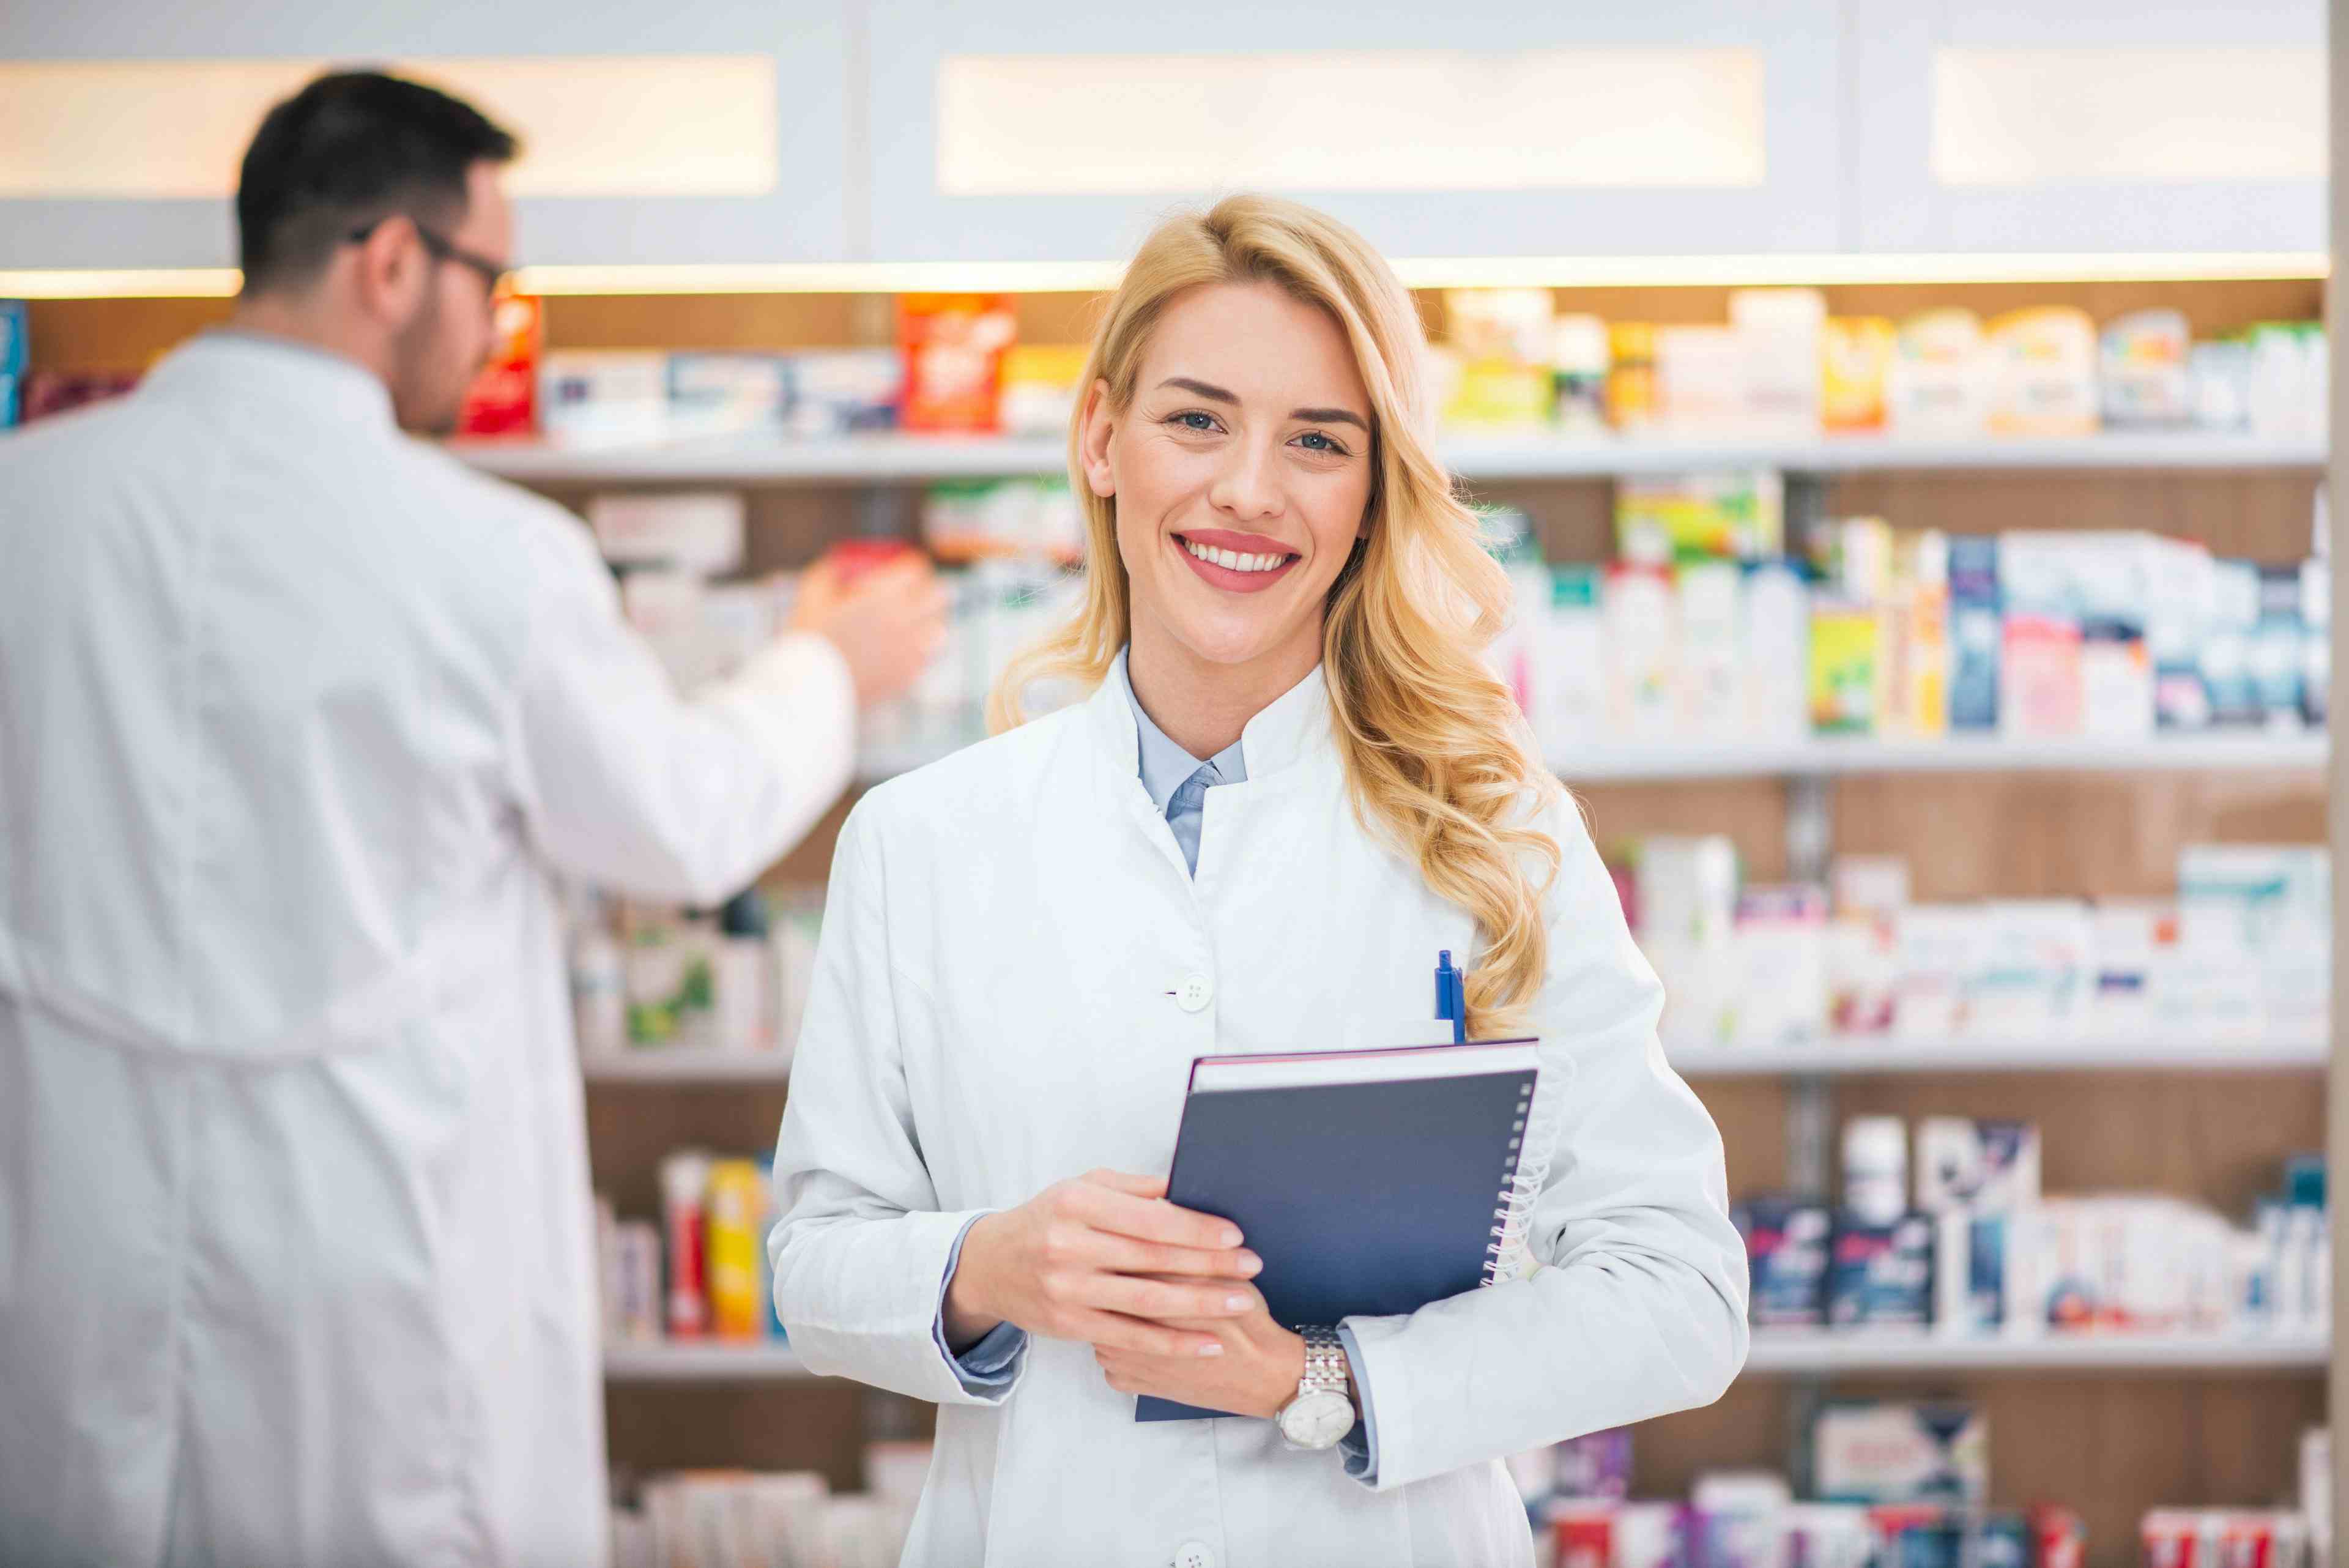 Portrait of a smiling female pharmacist, male colleague working with drugs in the background. | Image Credit: bnenin - stock.adobe.com